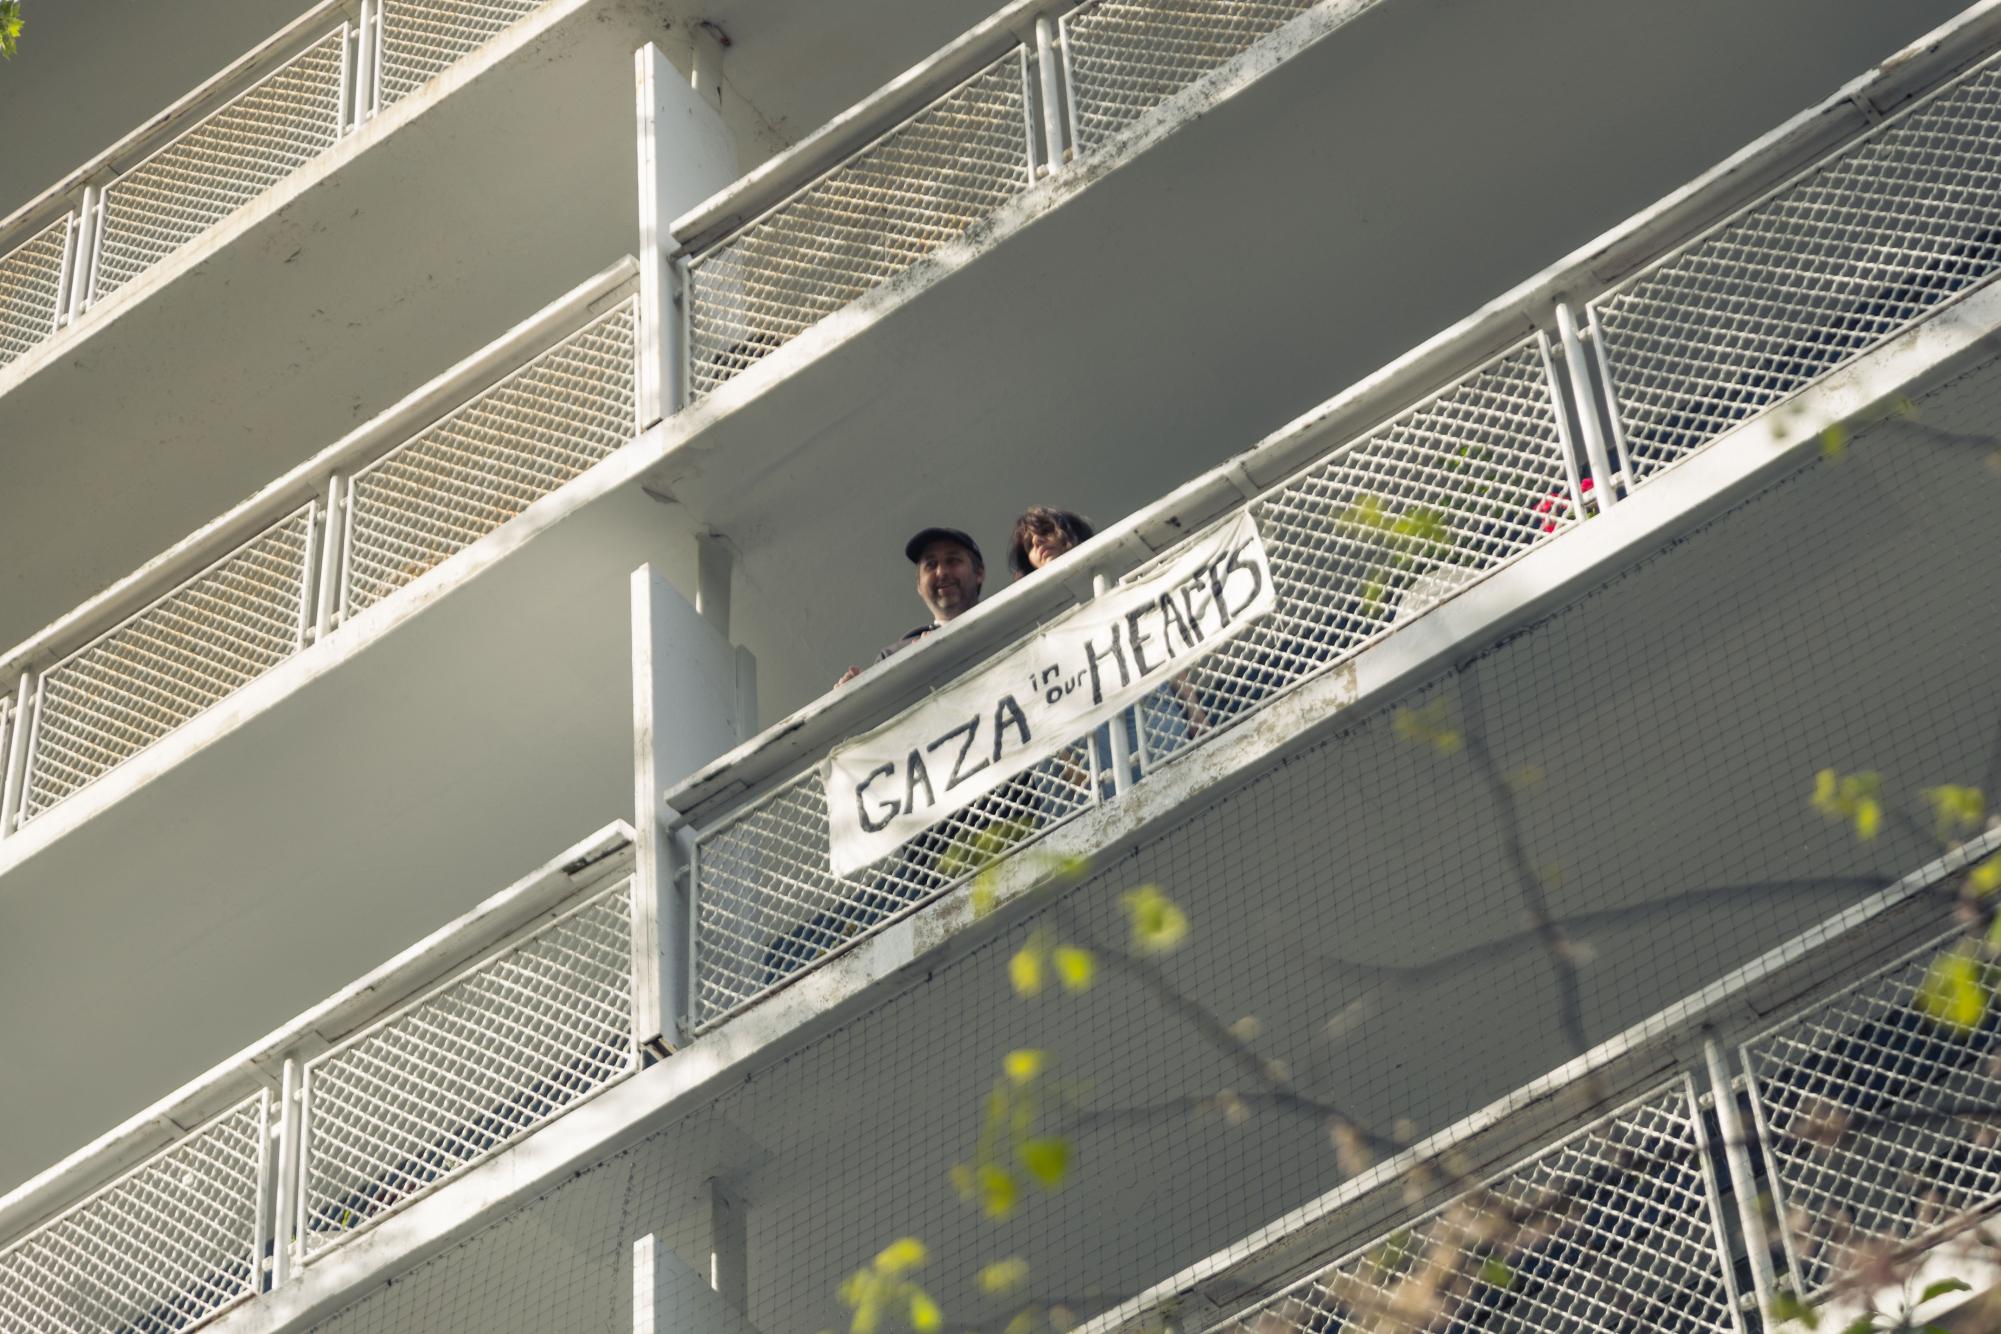 A sign hanging out of a balcony that reads “Gaza in our hearts.”